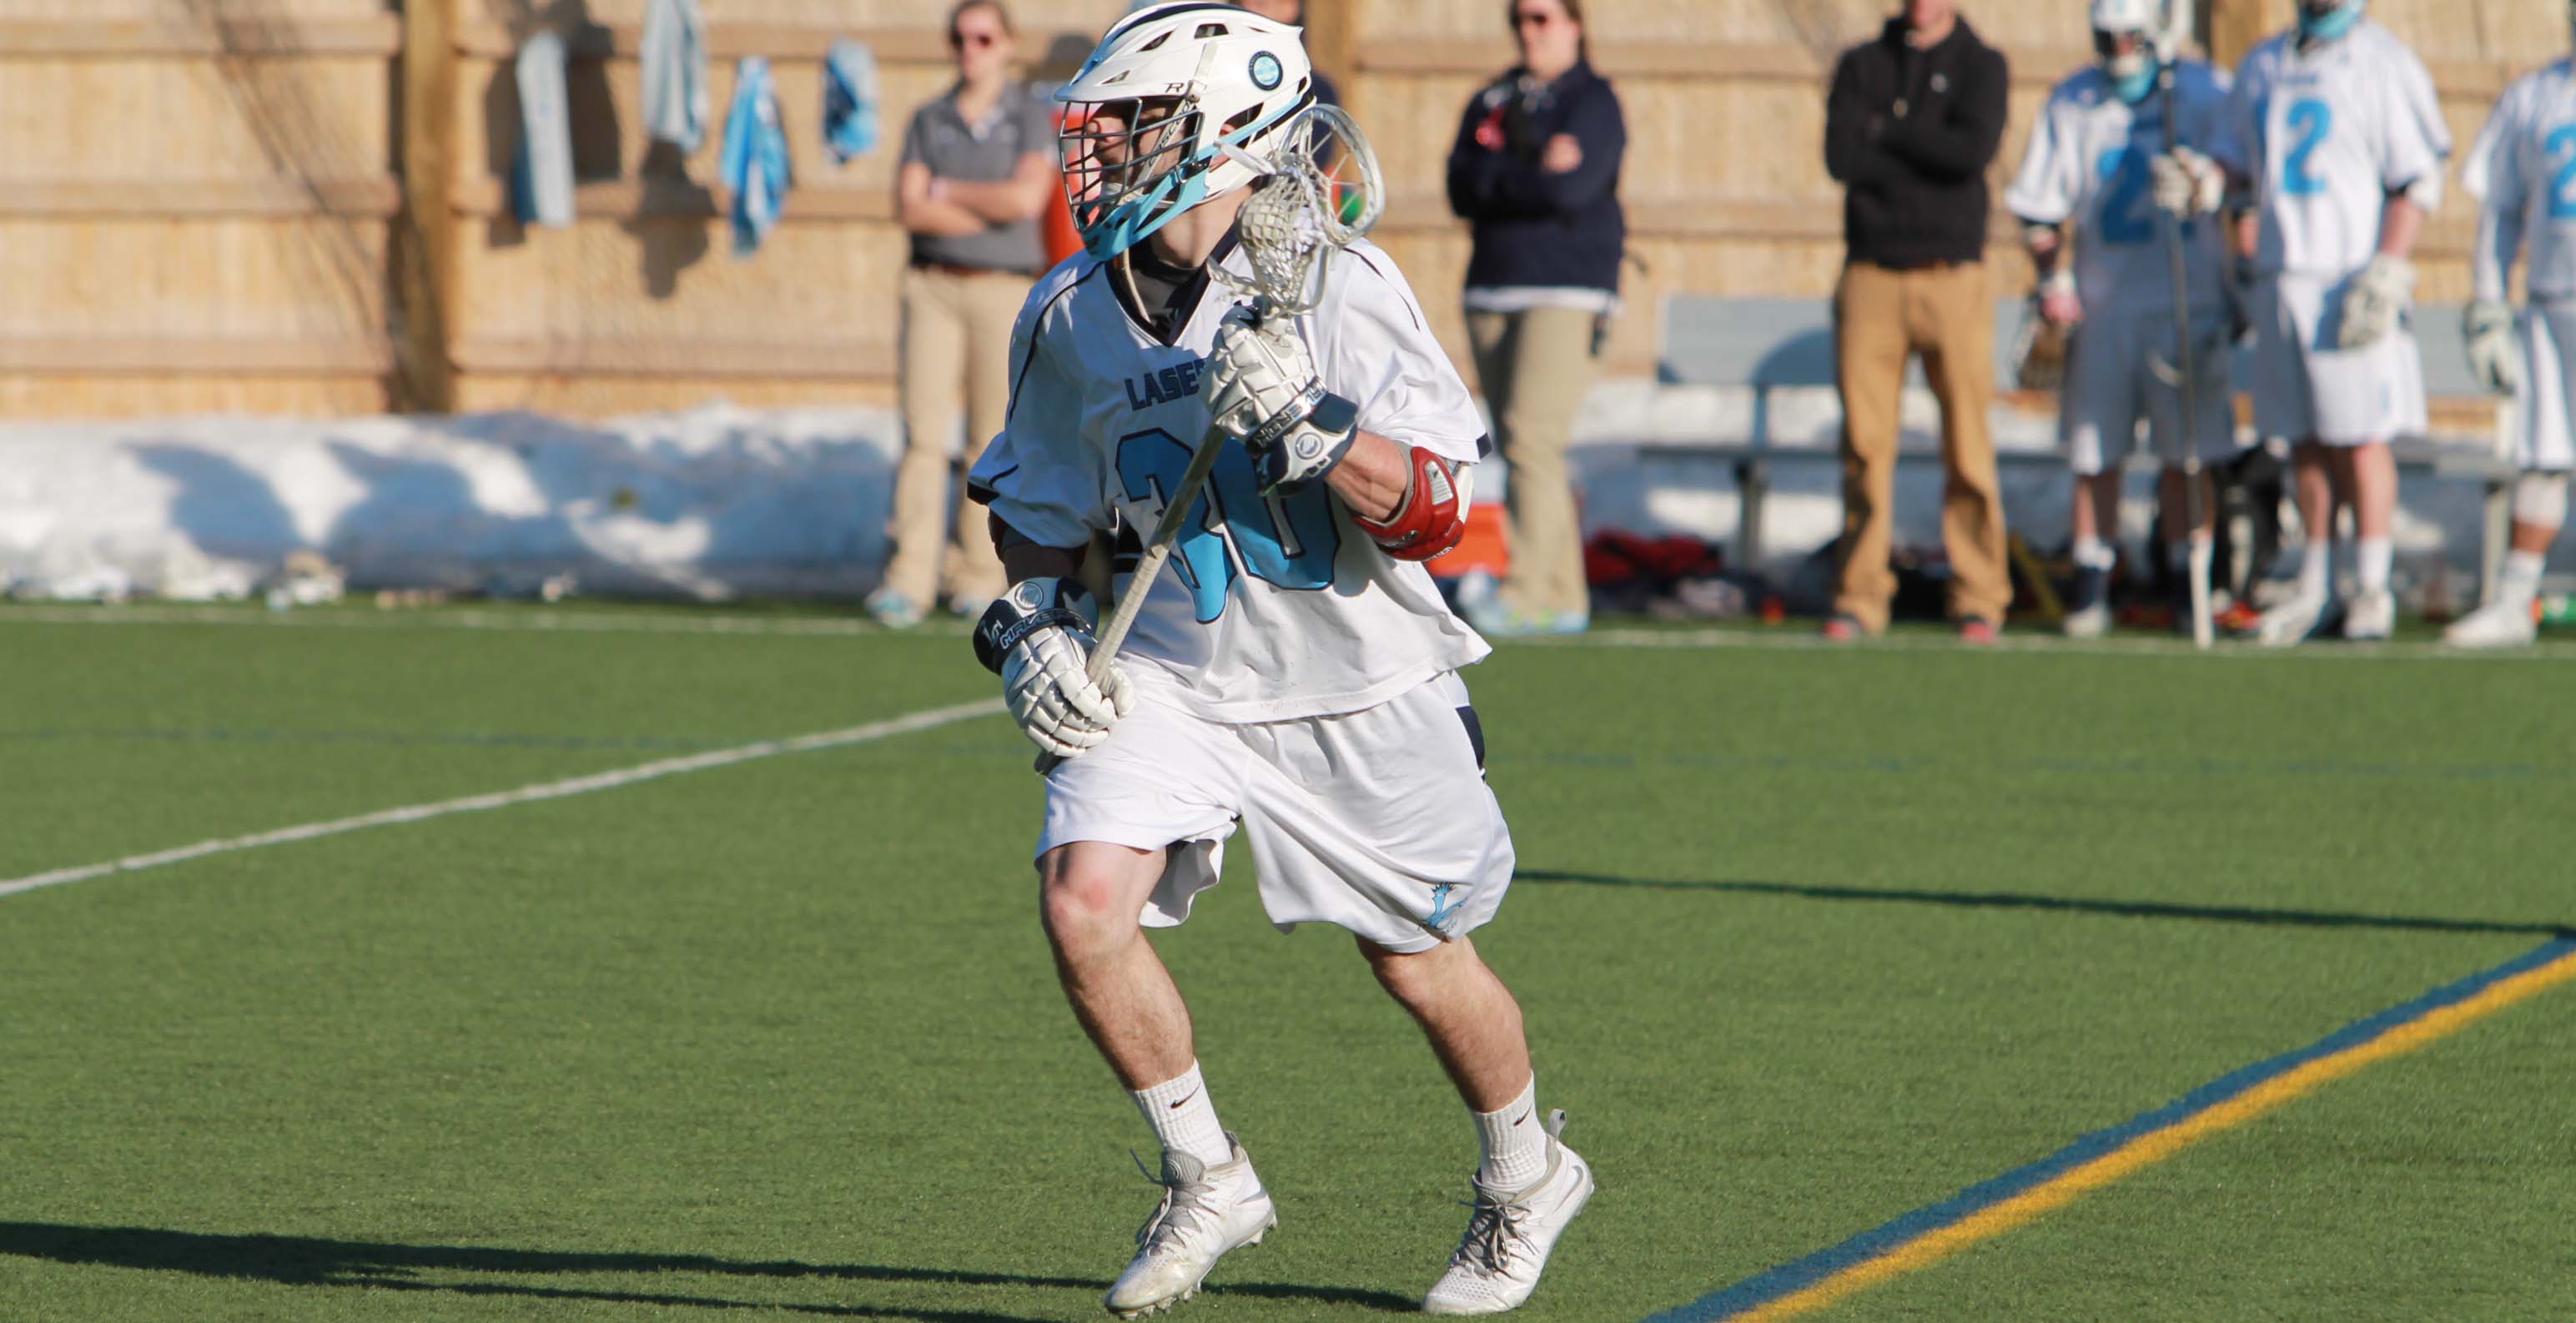 Men's Lacrosse Opens GNAC Action with 12-4 Win over Rivier